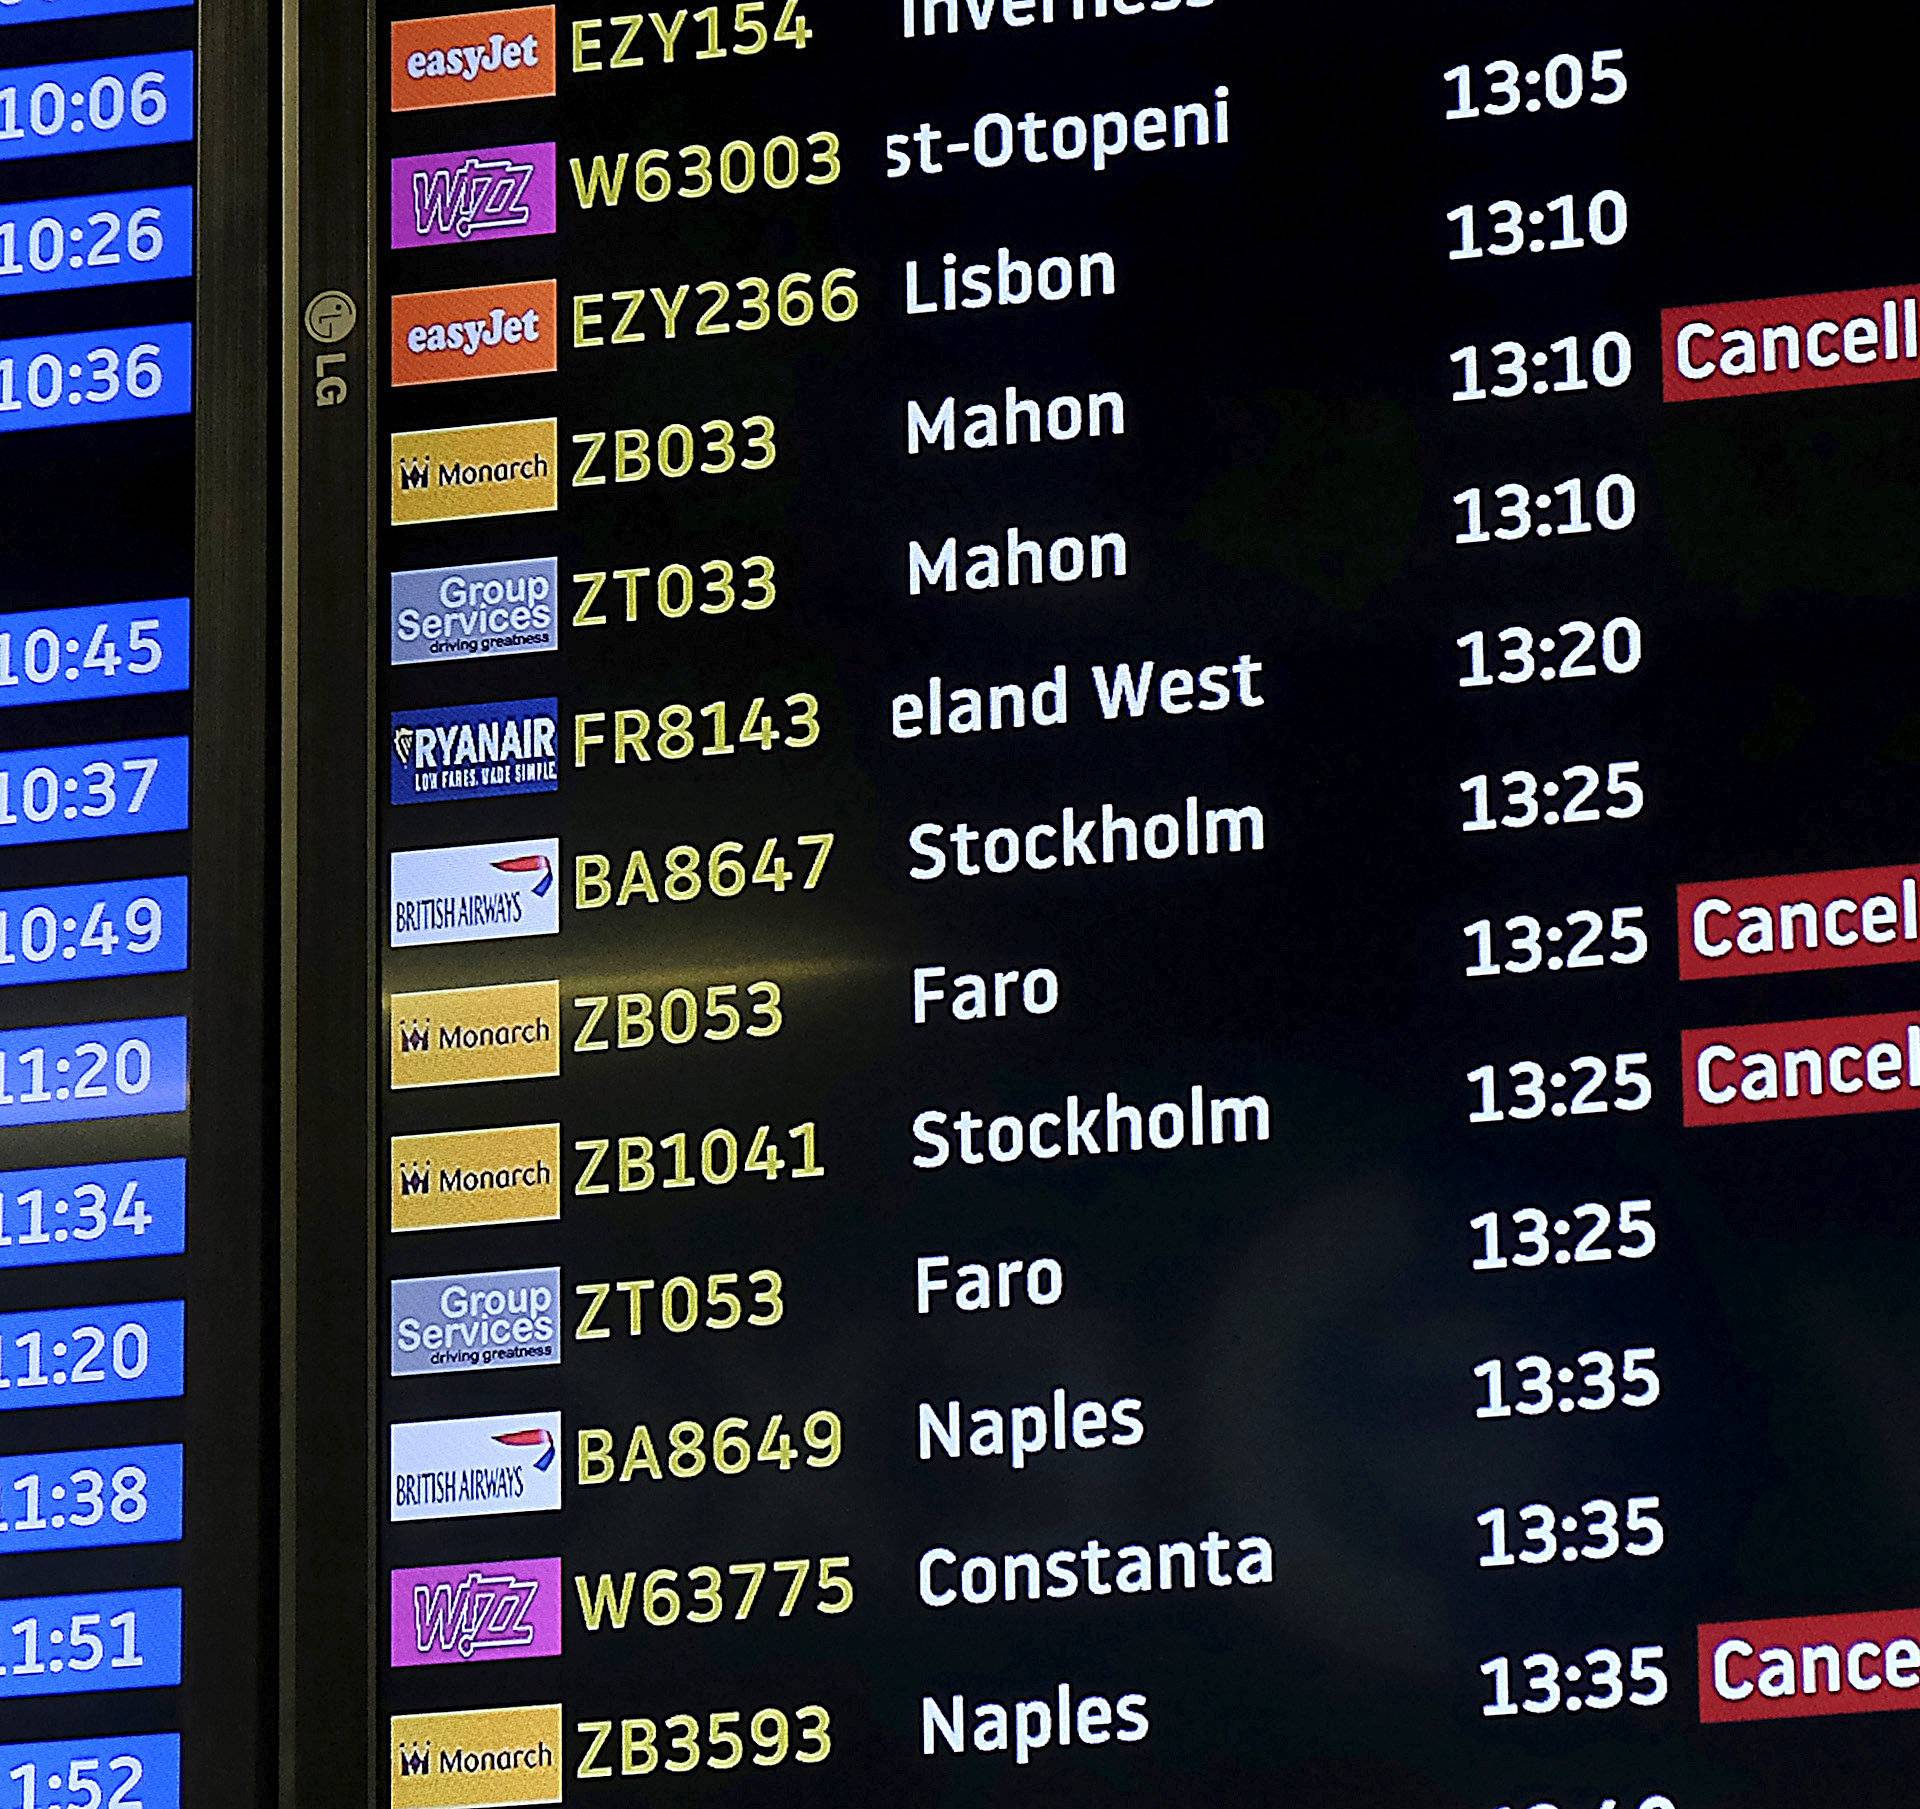 Screens display cancelled Monarch flights after the airline ceased trading, at Luton airport, Britain